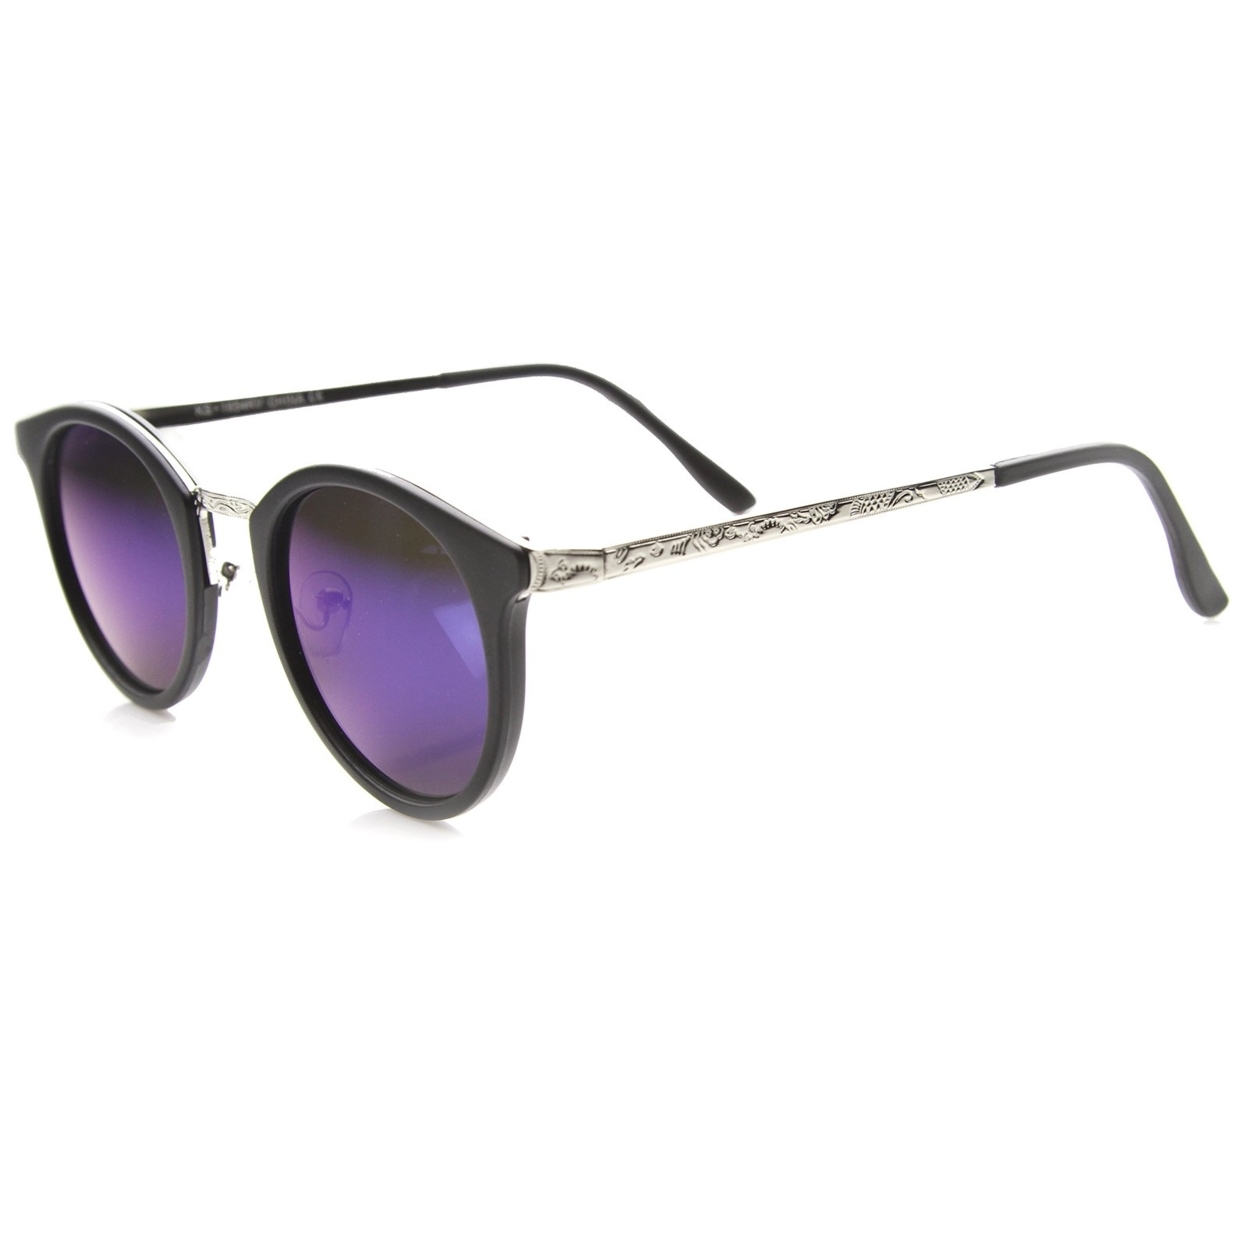 Horn Rimmed Sunglasses With UV400 Protected Mirrored Lens - Matte Black-Silver / Midnight